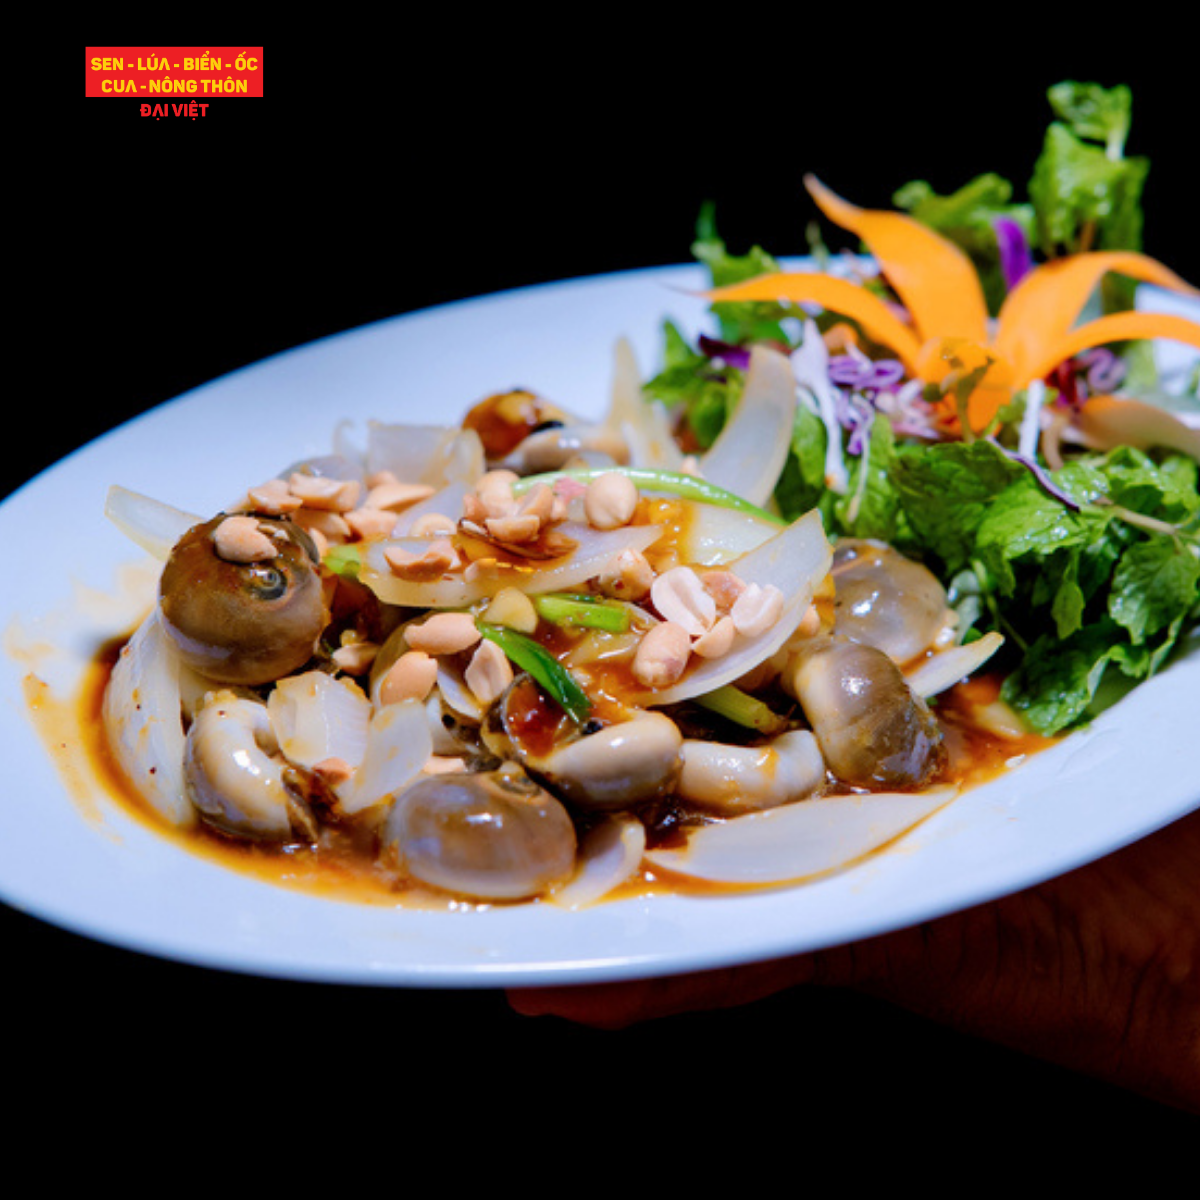  Grease Snail With Tamarind Sauce - Ốc Mỡ Xào Me 